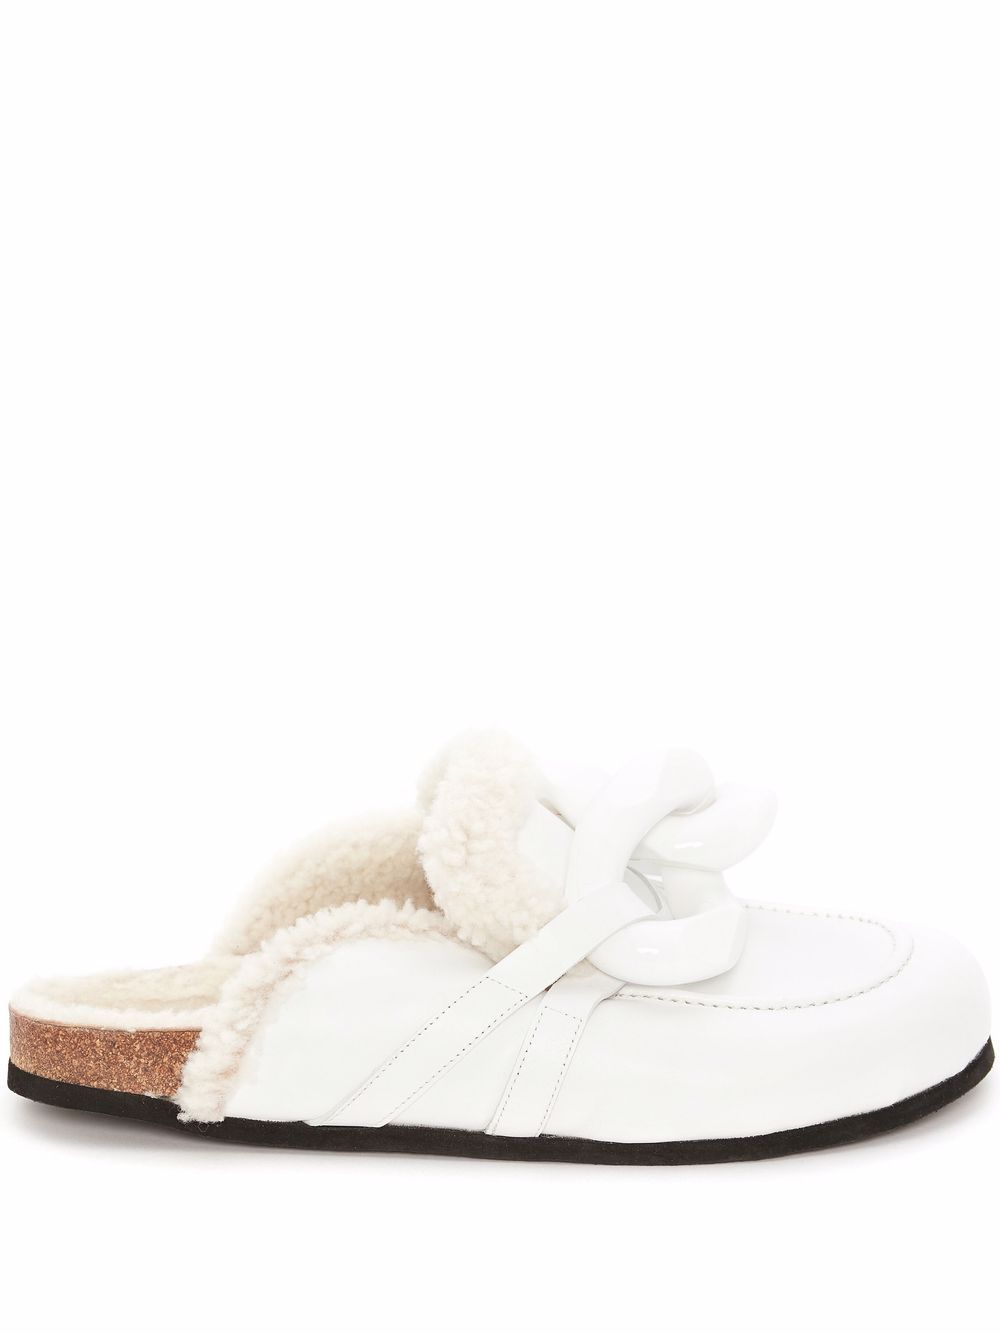 JW Anderson Chain shearling loafer mules - White von JW Anderson